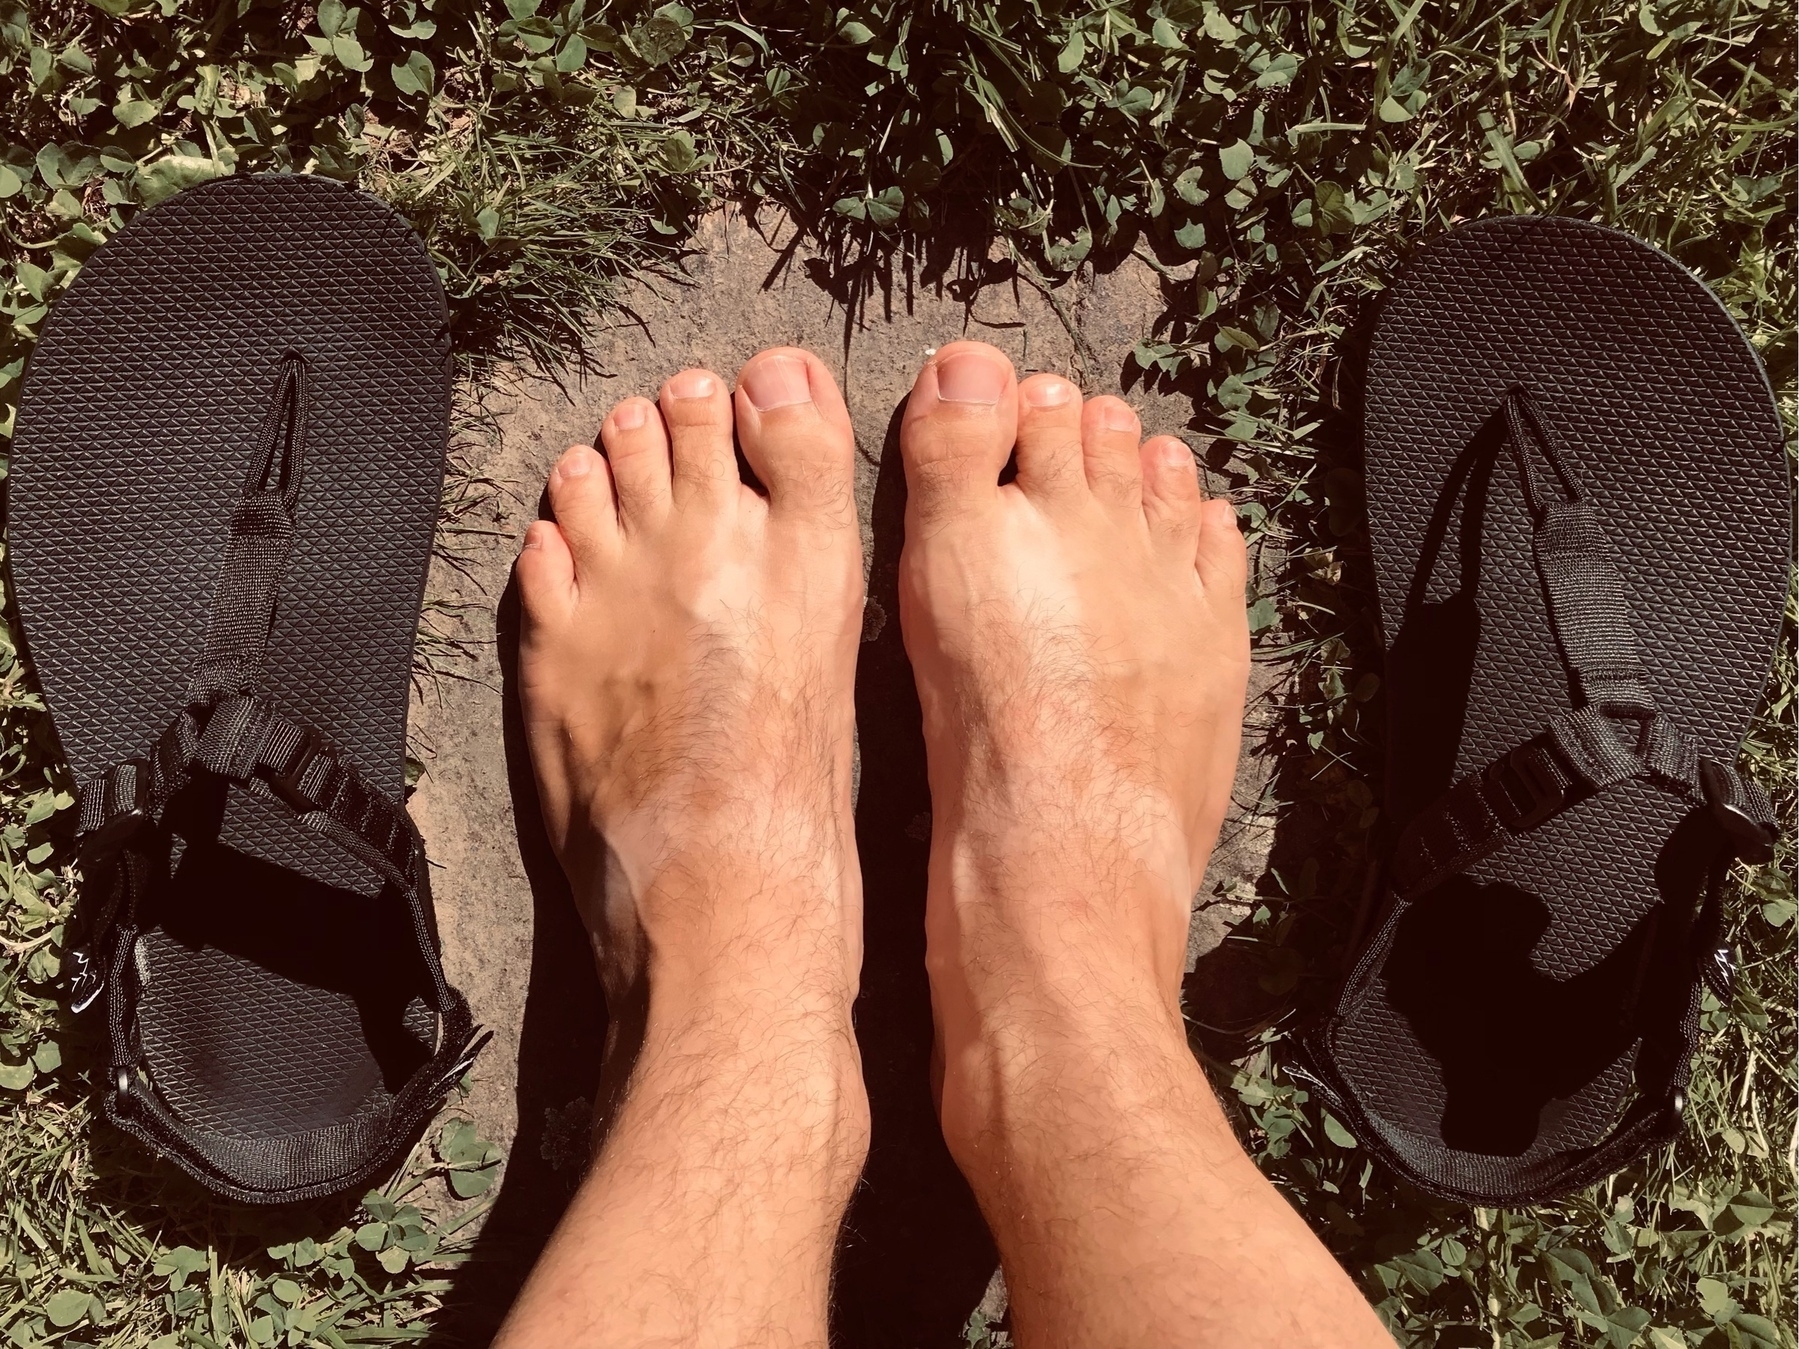 Top view of lightly tanned bare feet with tan lines in the shape of sandal straps. The black sandals that caused those tan lines laying to the left and right of the feet.